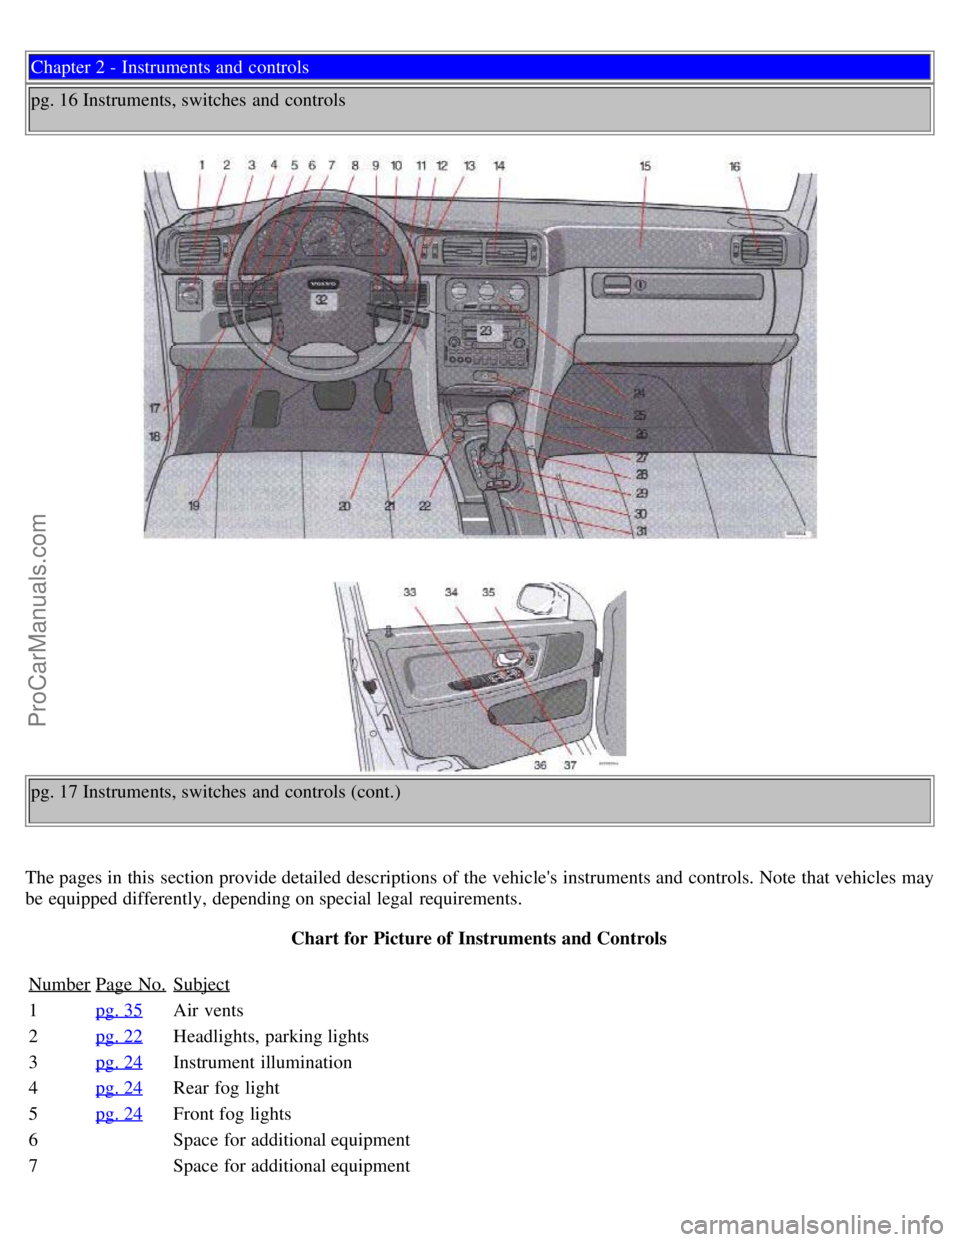 VOLVO S70 1999  Owners Manual Chapter 2 - Instruments and  controls
pg. 16 Instruments, switches  and  controls
pg. 17 Instruments, switches  and  controls (cont.)
The pages in this  section provide detailed descriptions of the ve